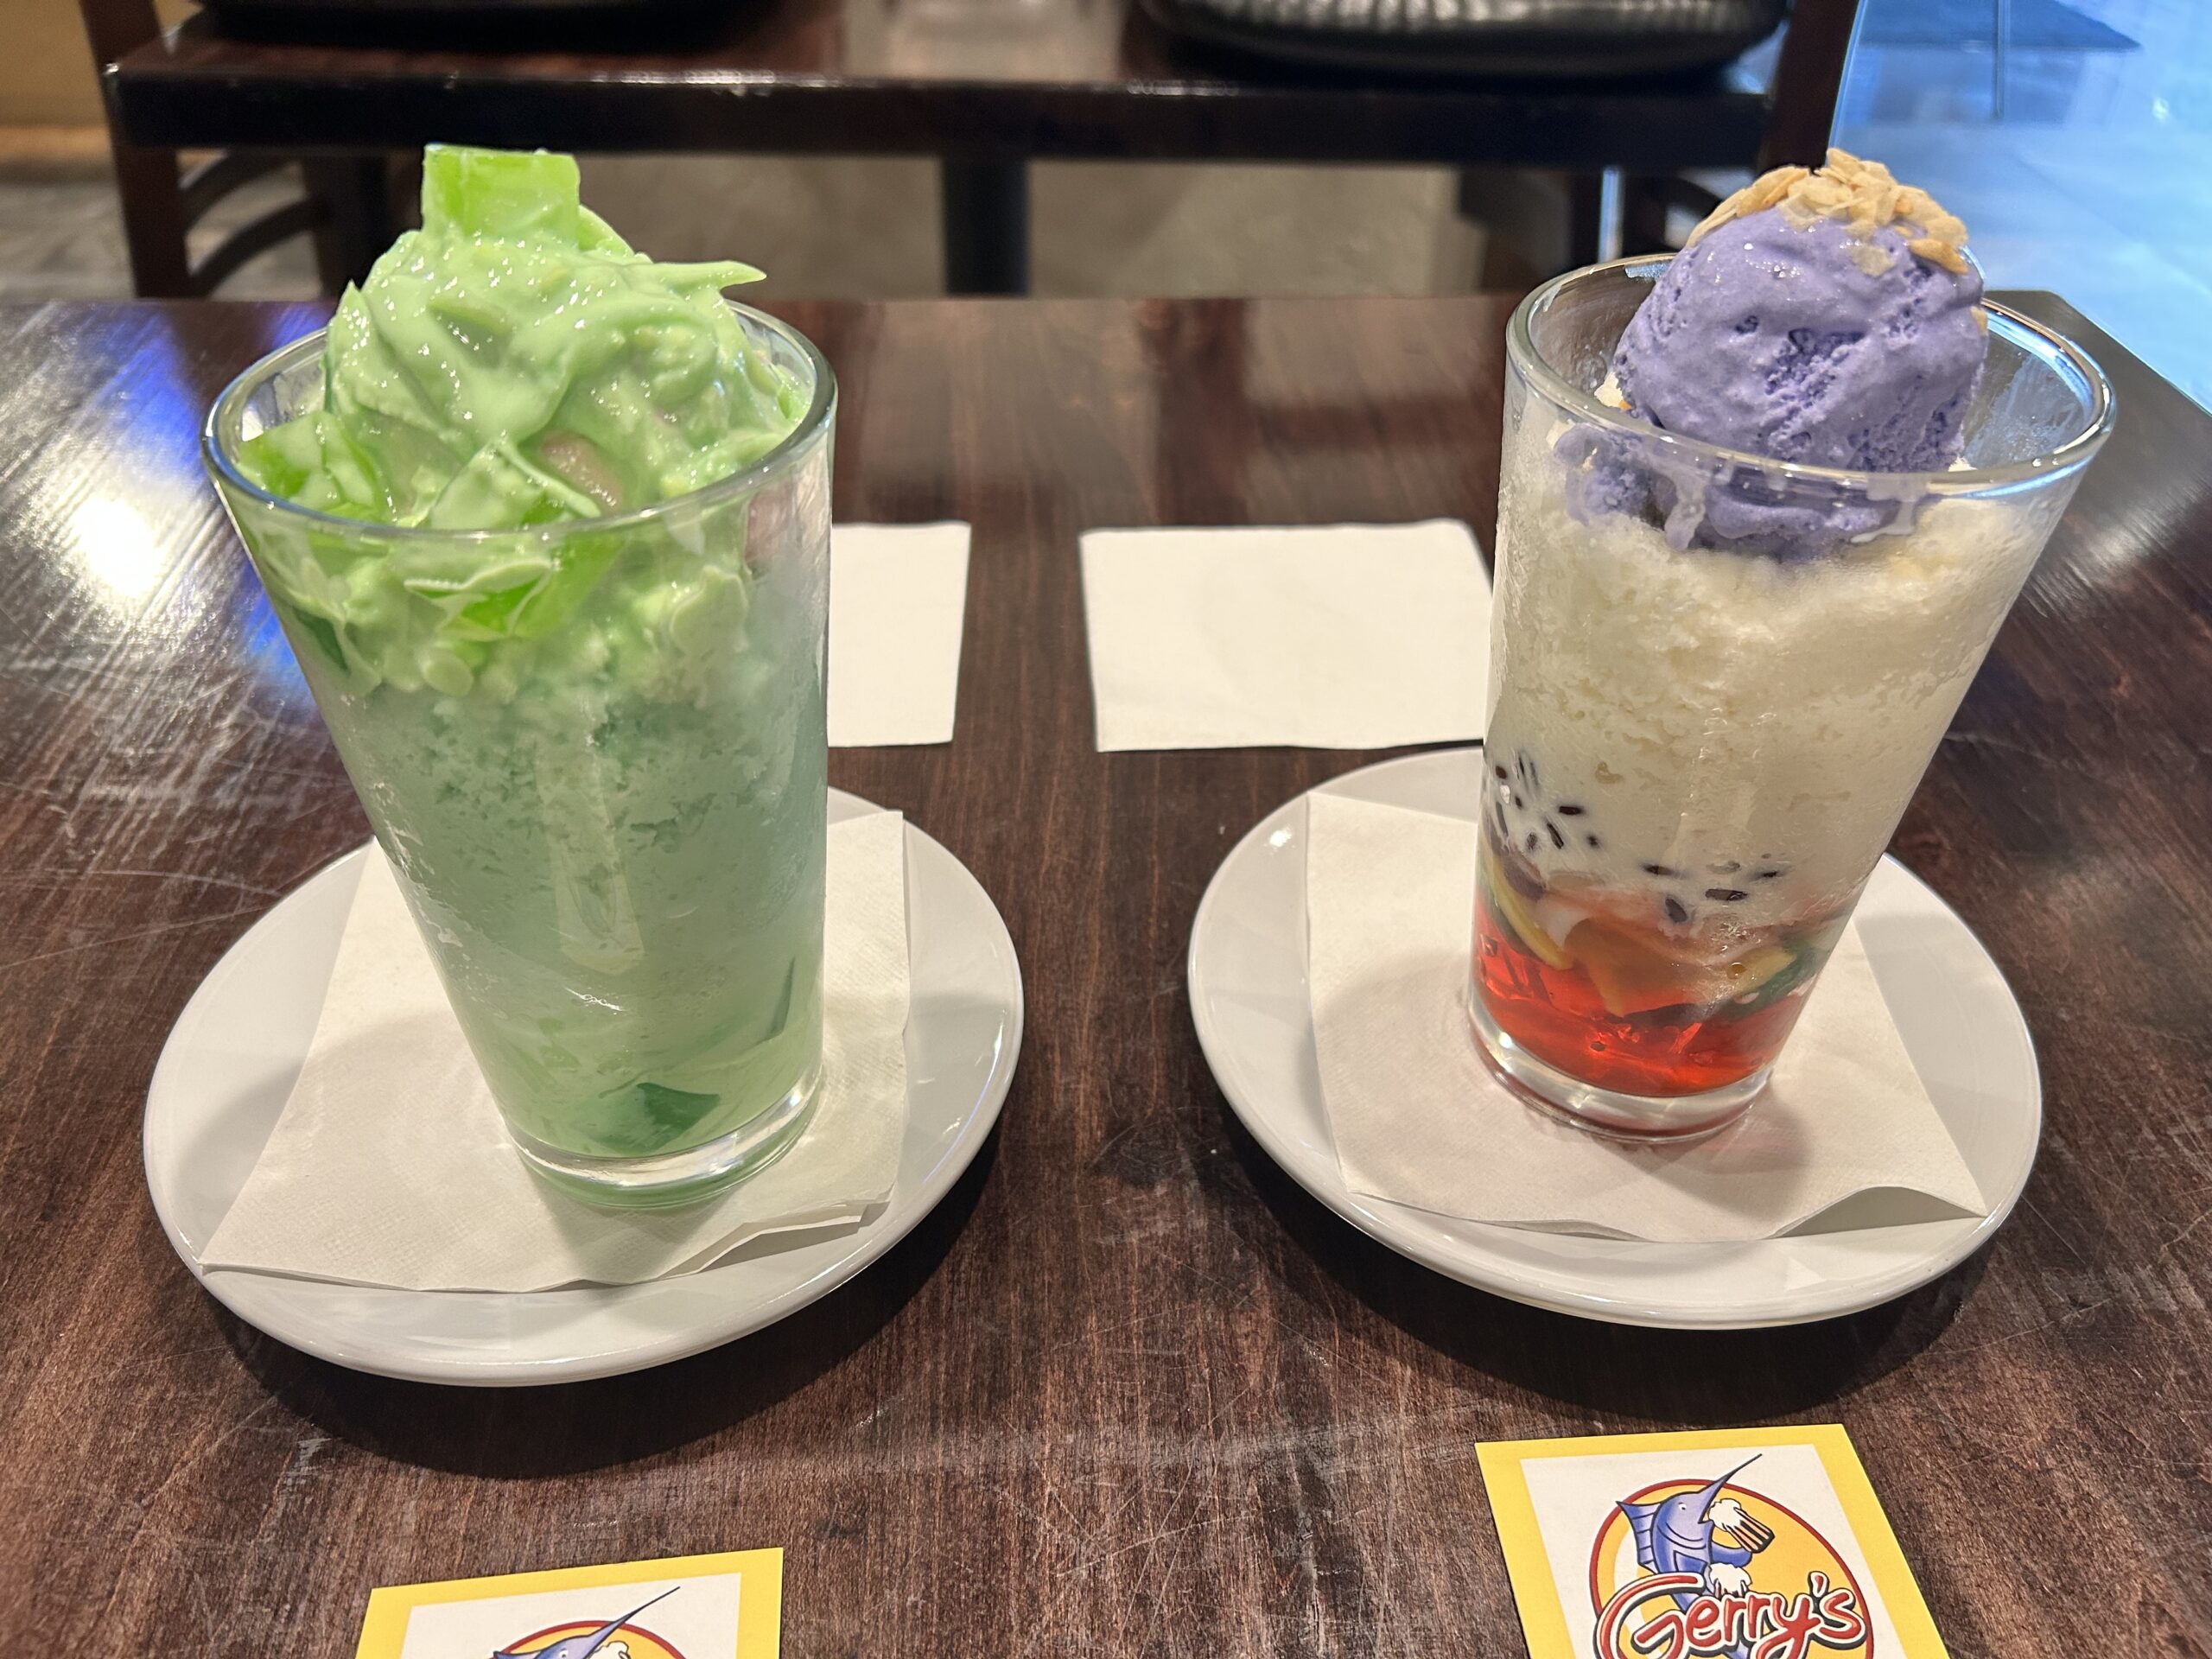 Two glasses of shaved ice on a table, with Gerry's Grill napkins displayed in front. The one on the left is lime green, while the other is red, white and purple at the top.